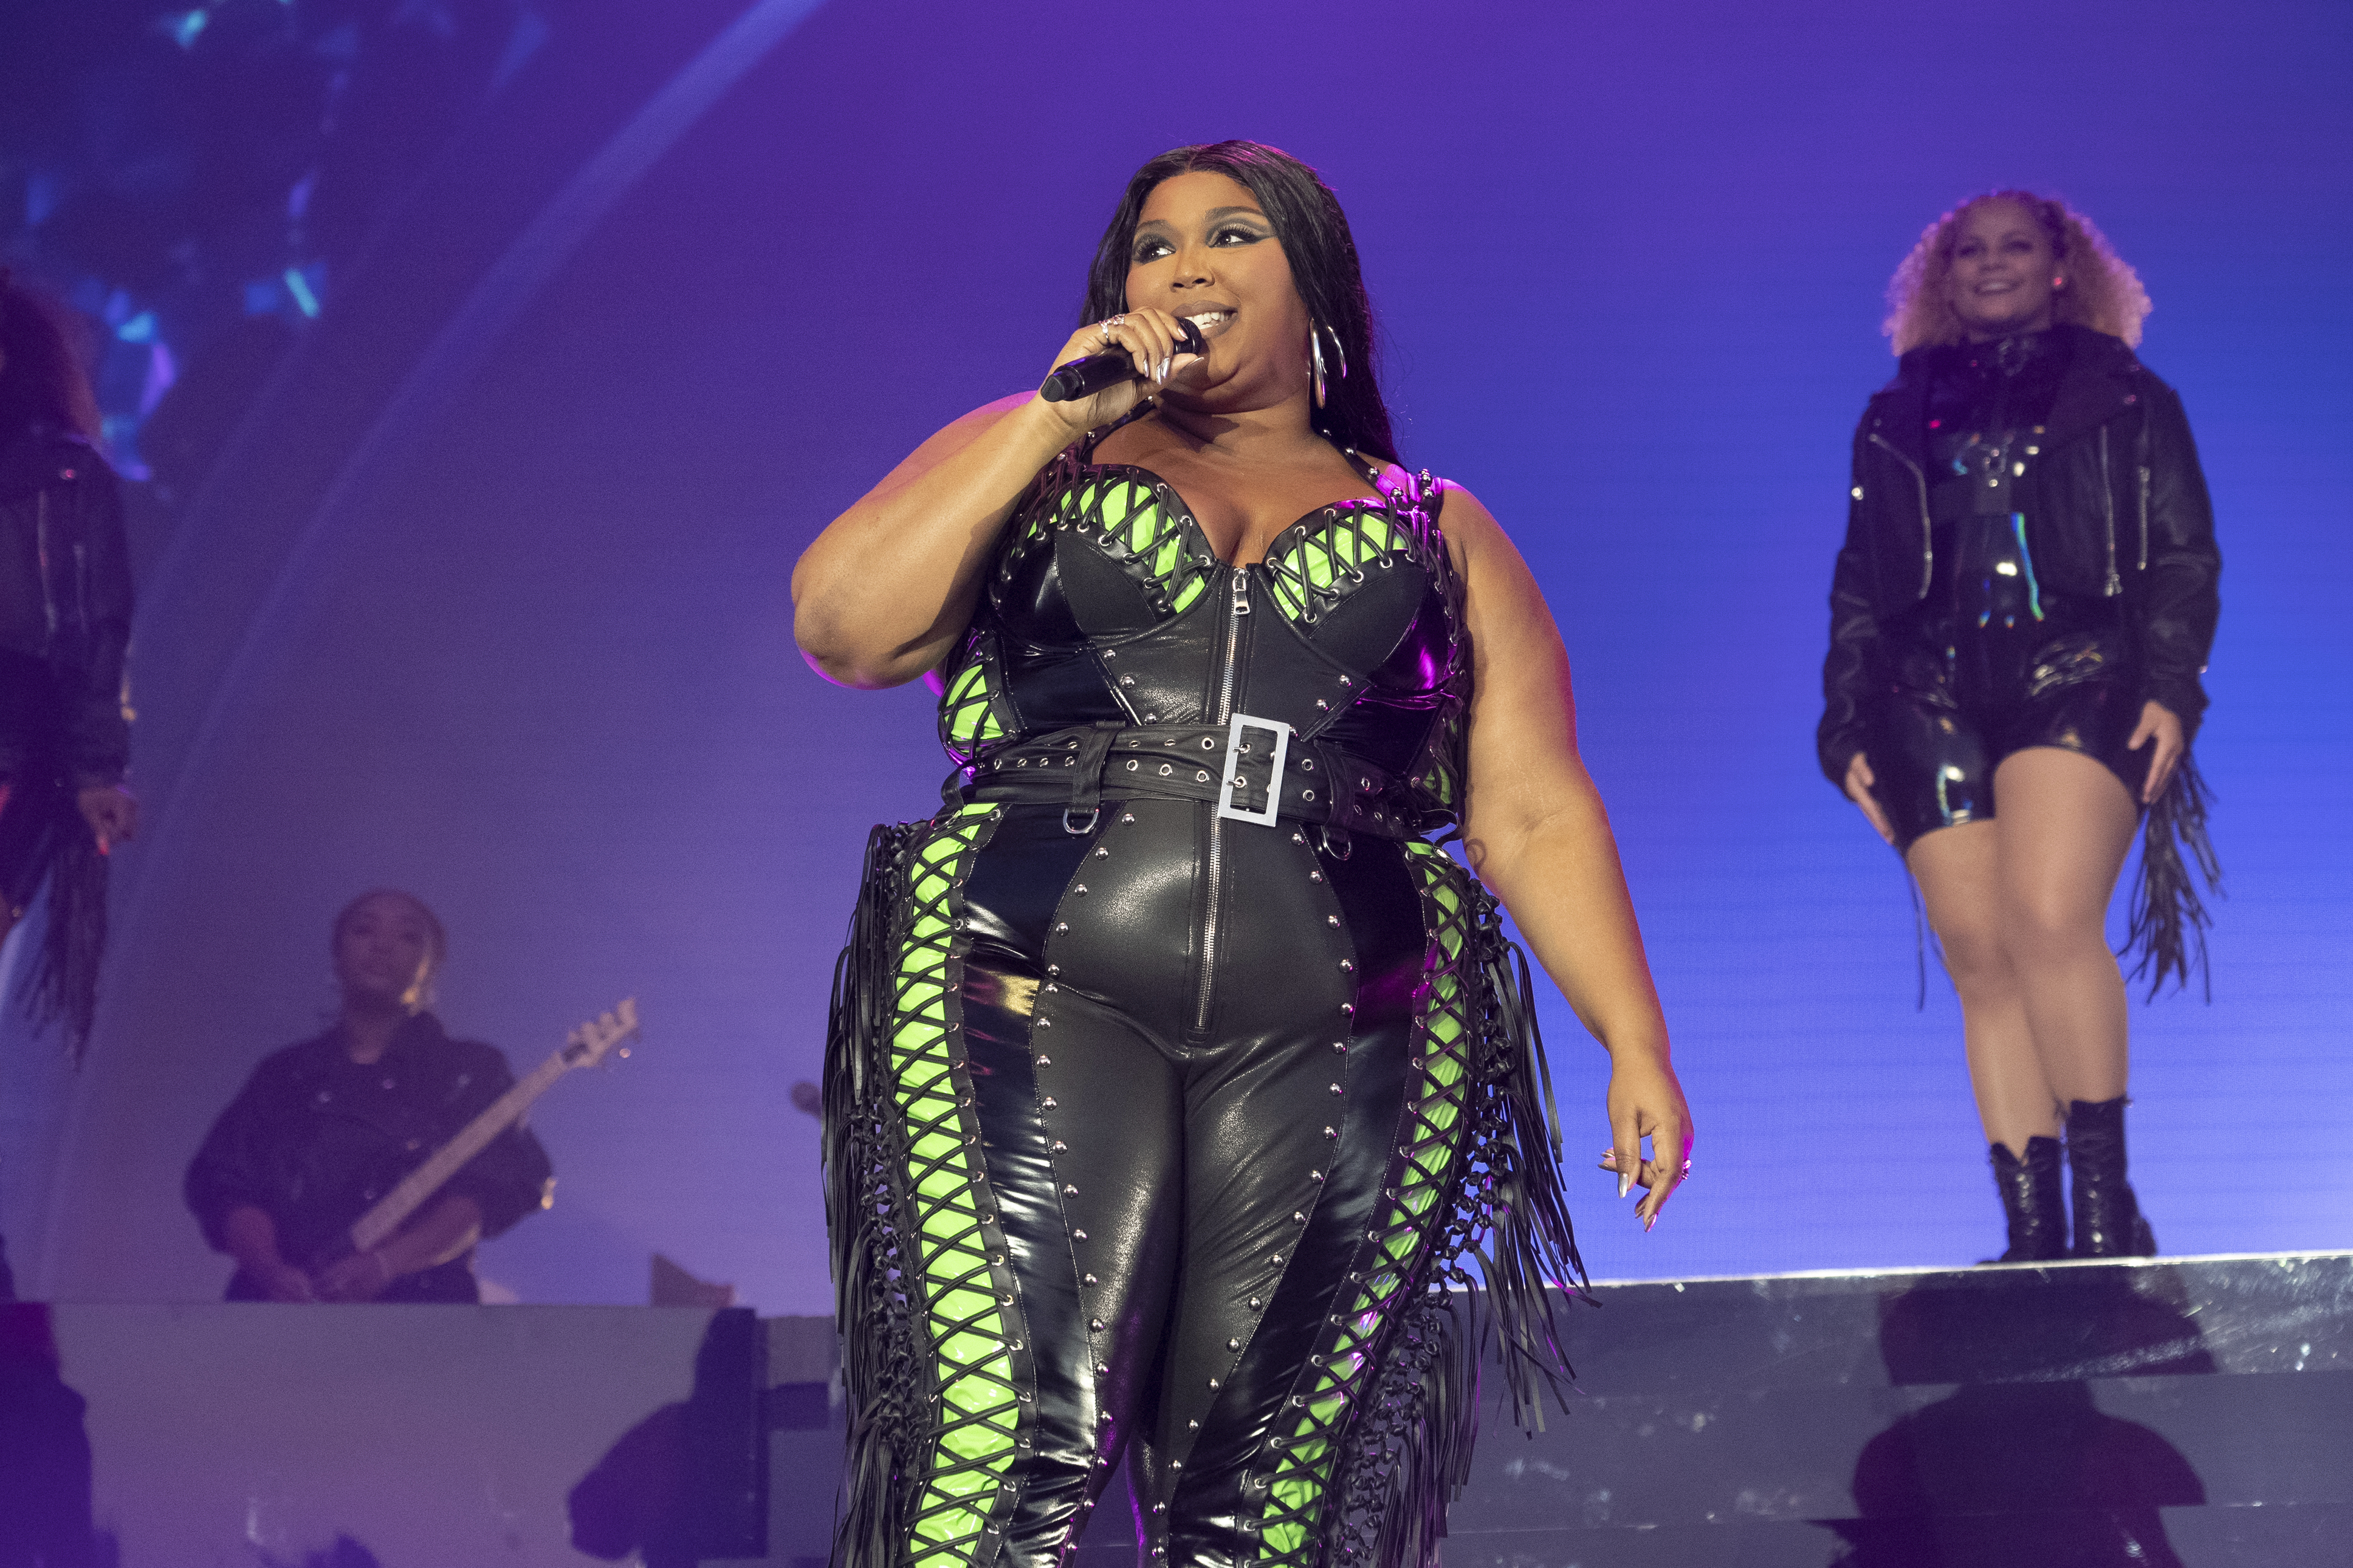 Lawsuit by former dancers accuses Lizzo of sexual harassment and creating a hostile work environment hq photo